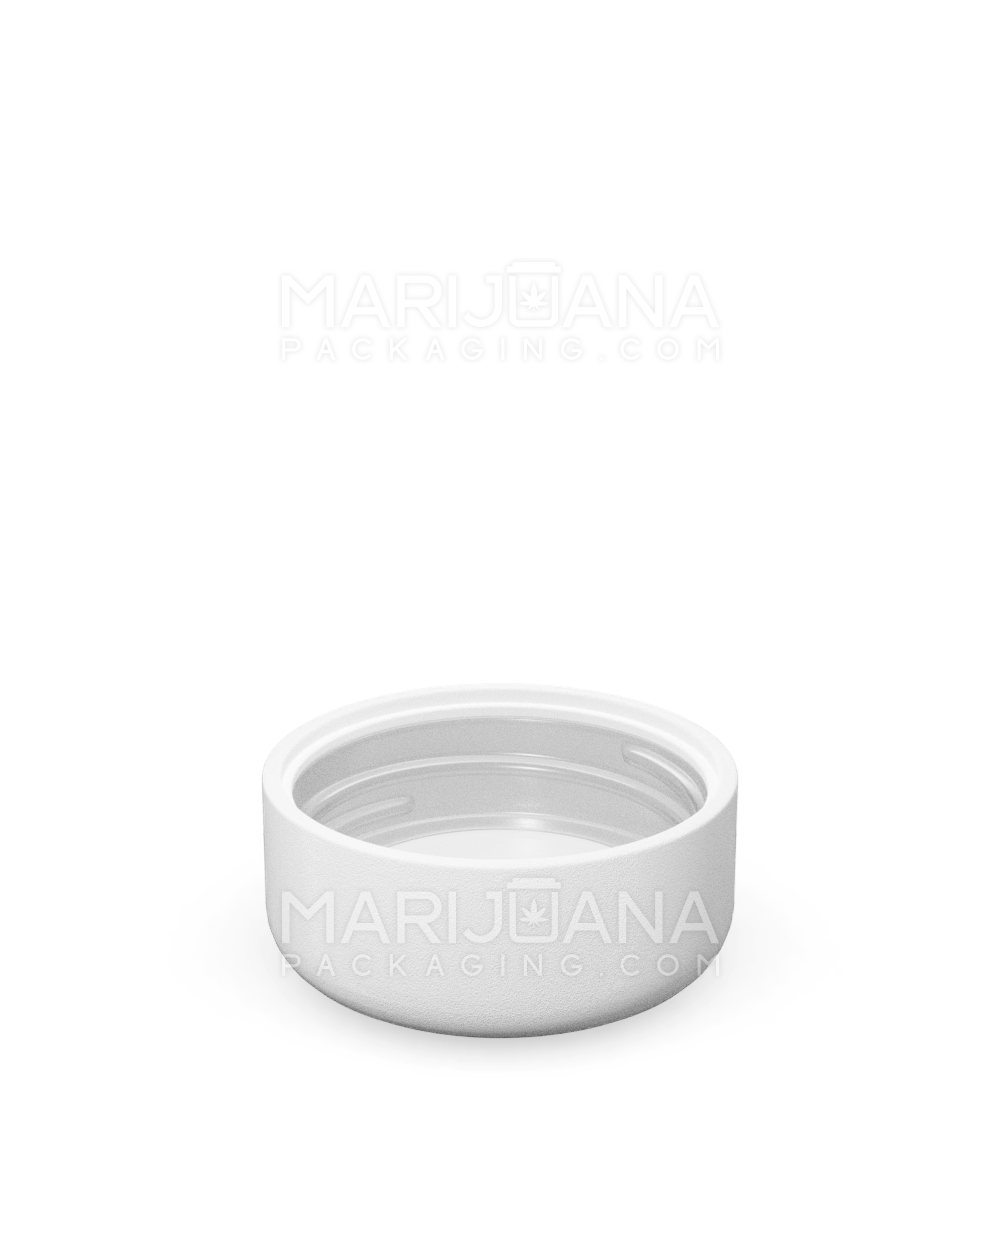 Child Resistant | Smooth Push Down & Turn Plastic Caps w/ Foam Liner | 28mm - Matte White - 504 Count - 4